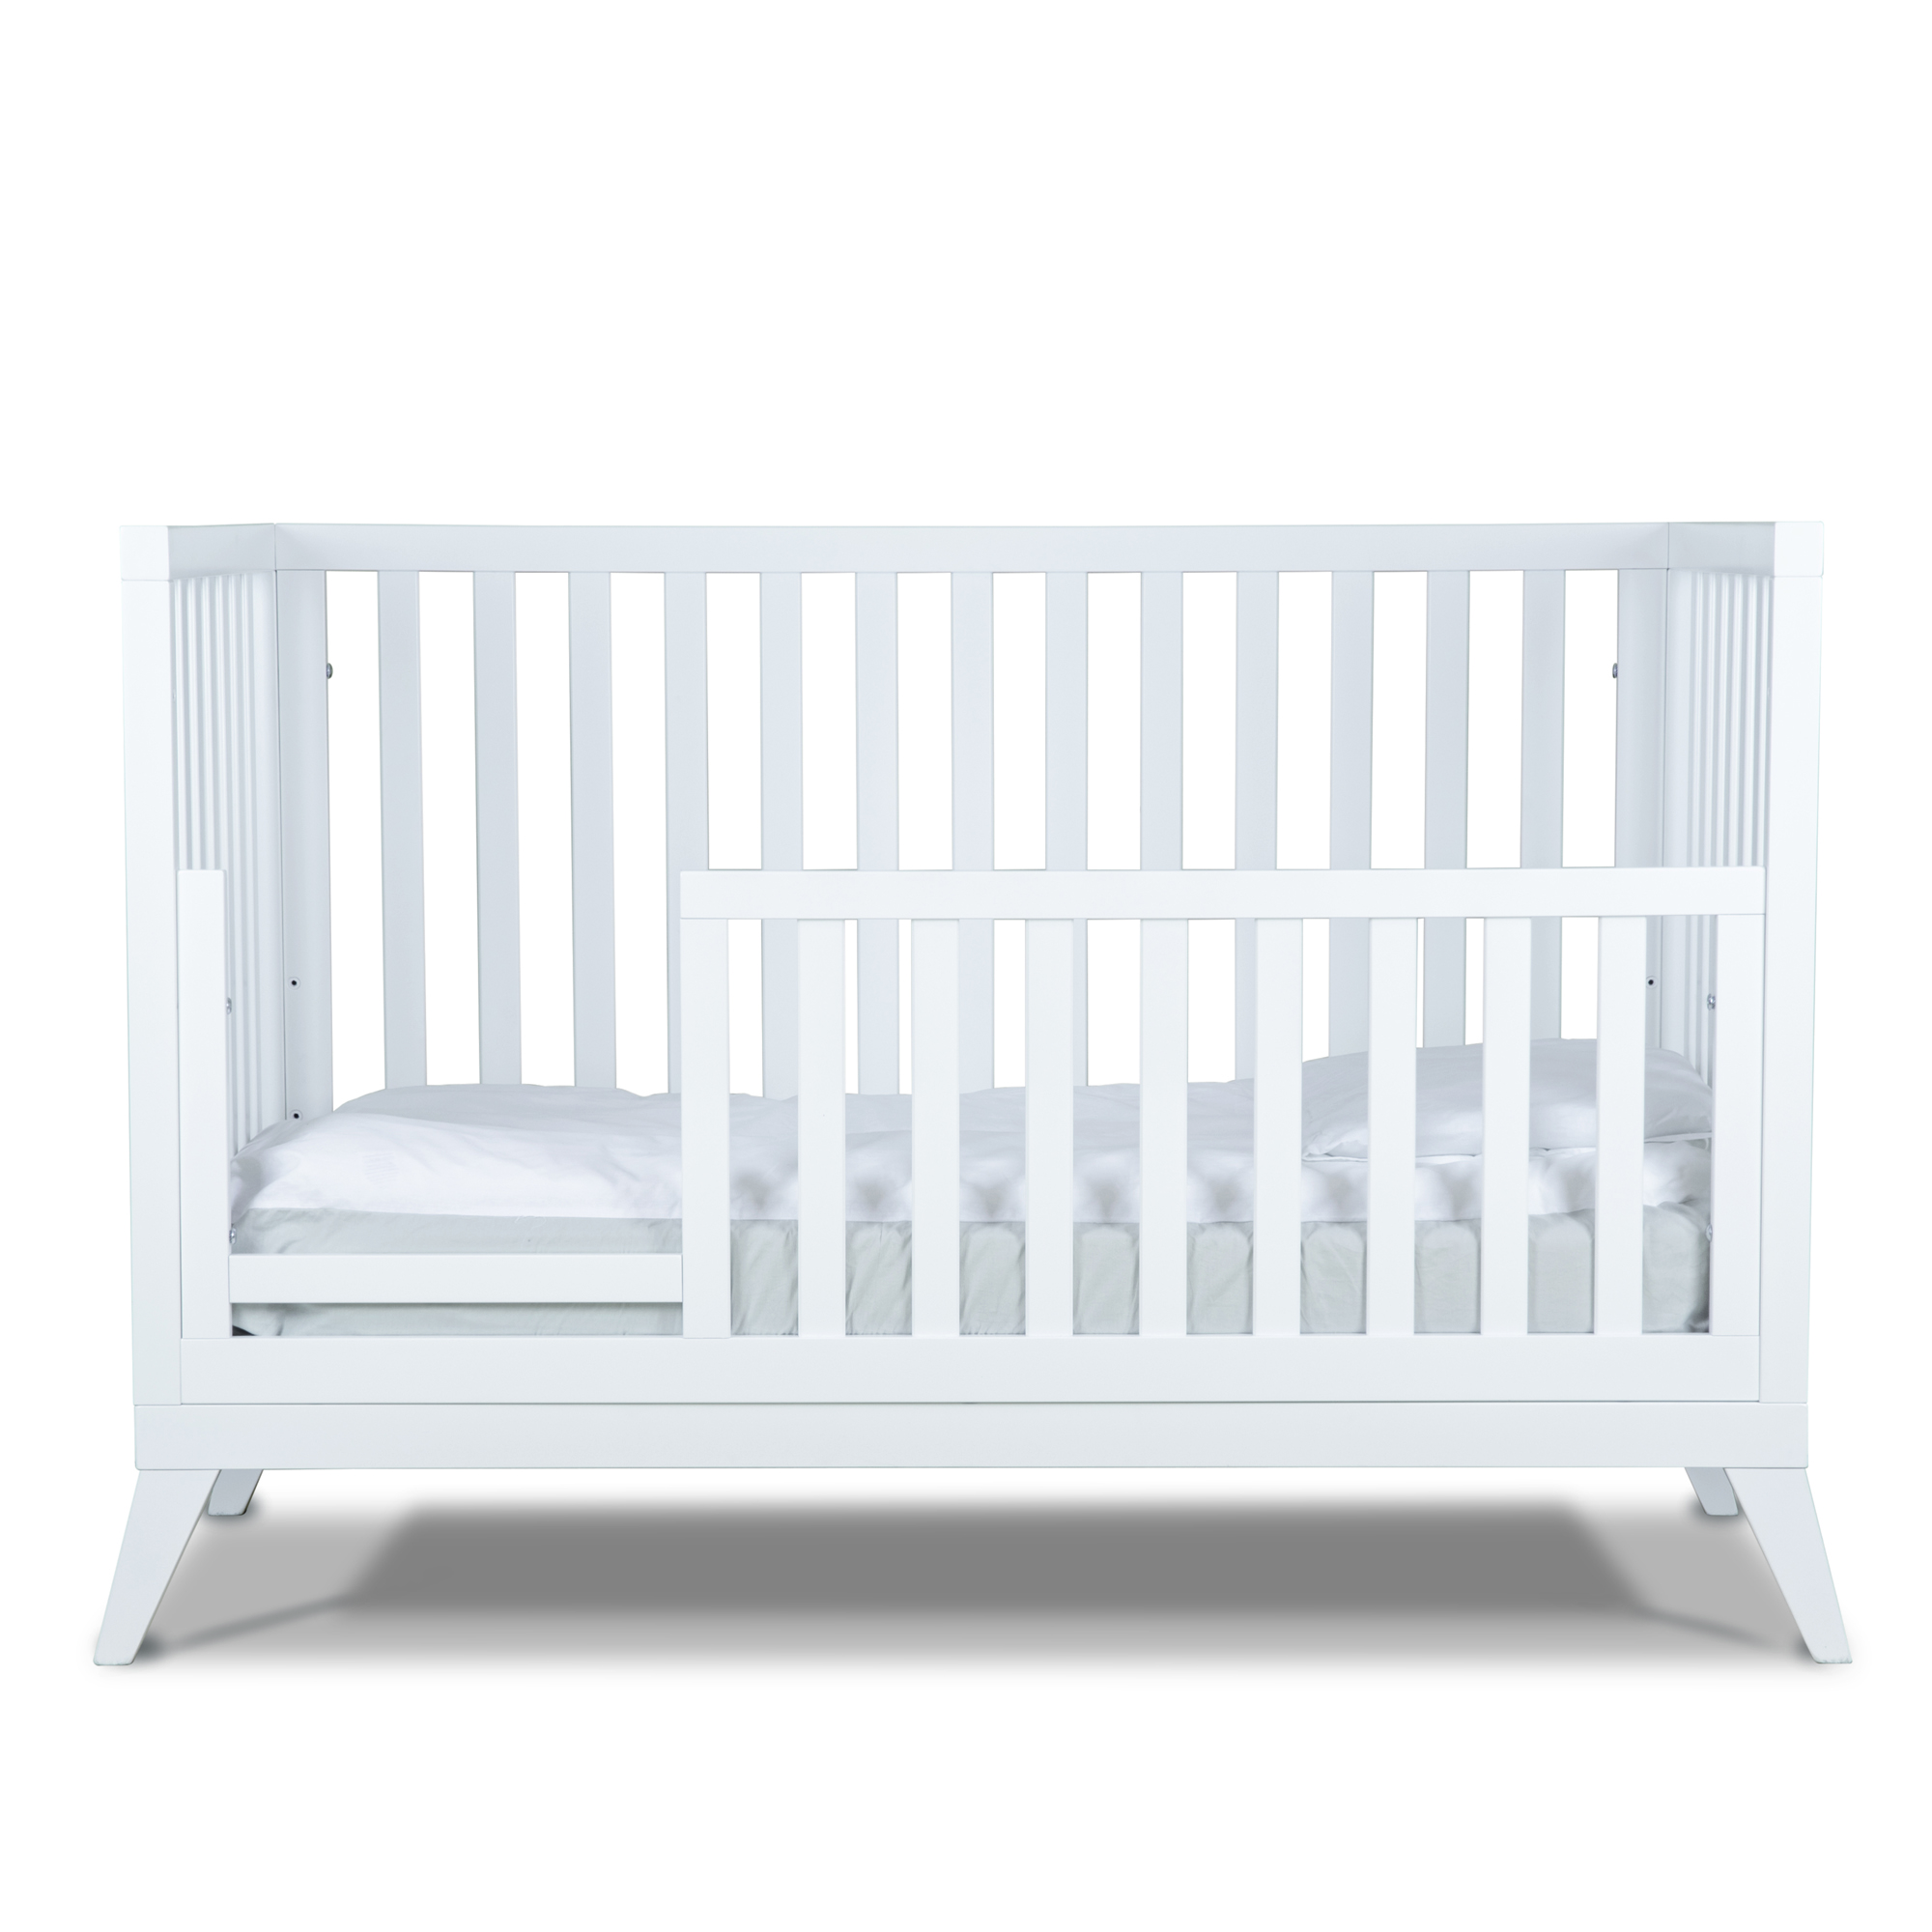 20515 Toddler Bed Rail (Made in Italy)